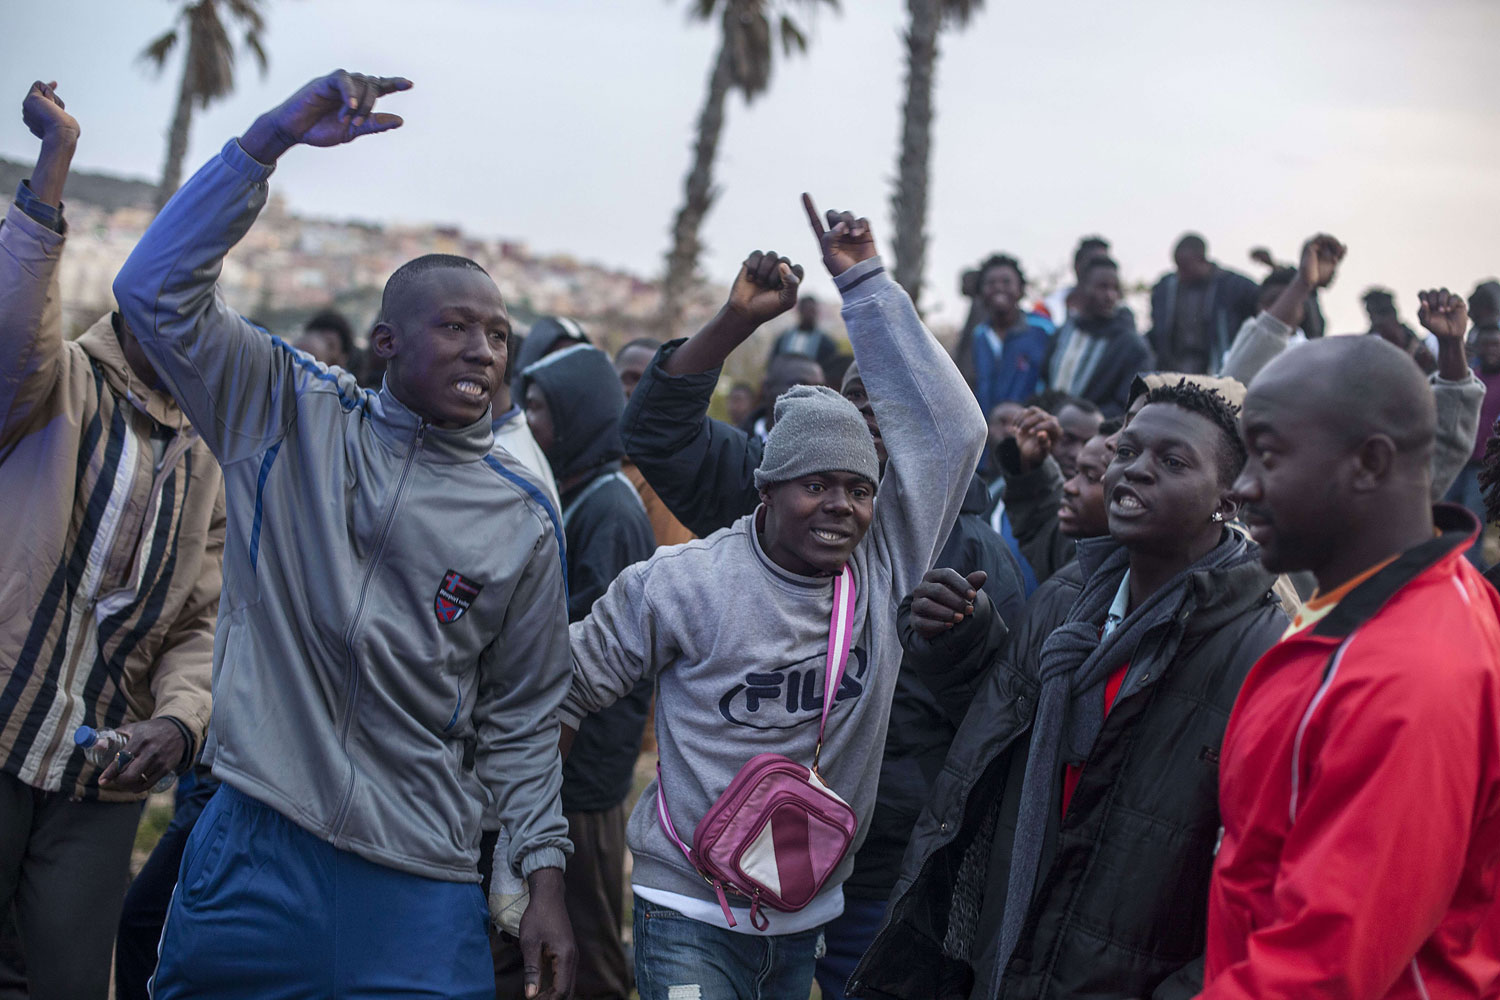 Would-be immigrants of the Centre for Temporary Stay of Immigrants cheer others who want to cross the fence near Beni Enza, into the north African Spanish enclave of Melilla on March 28, 2014.